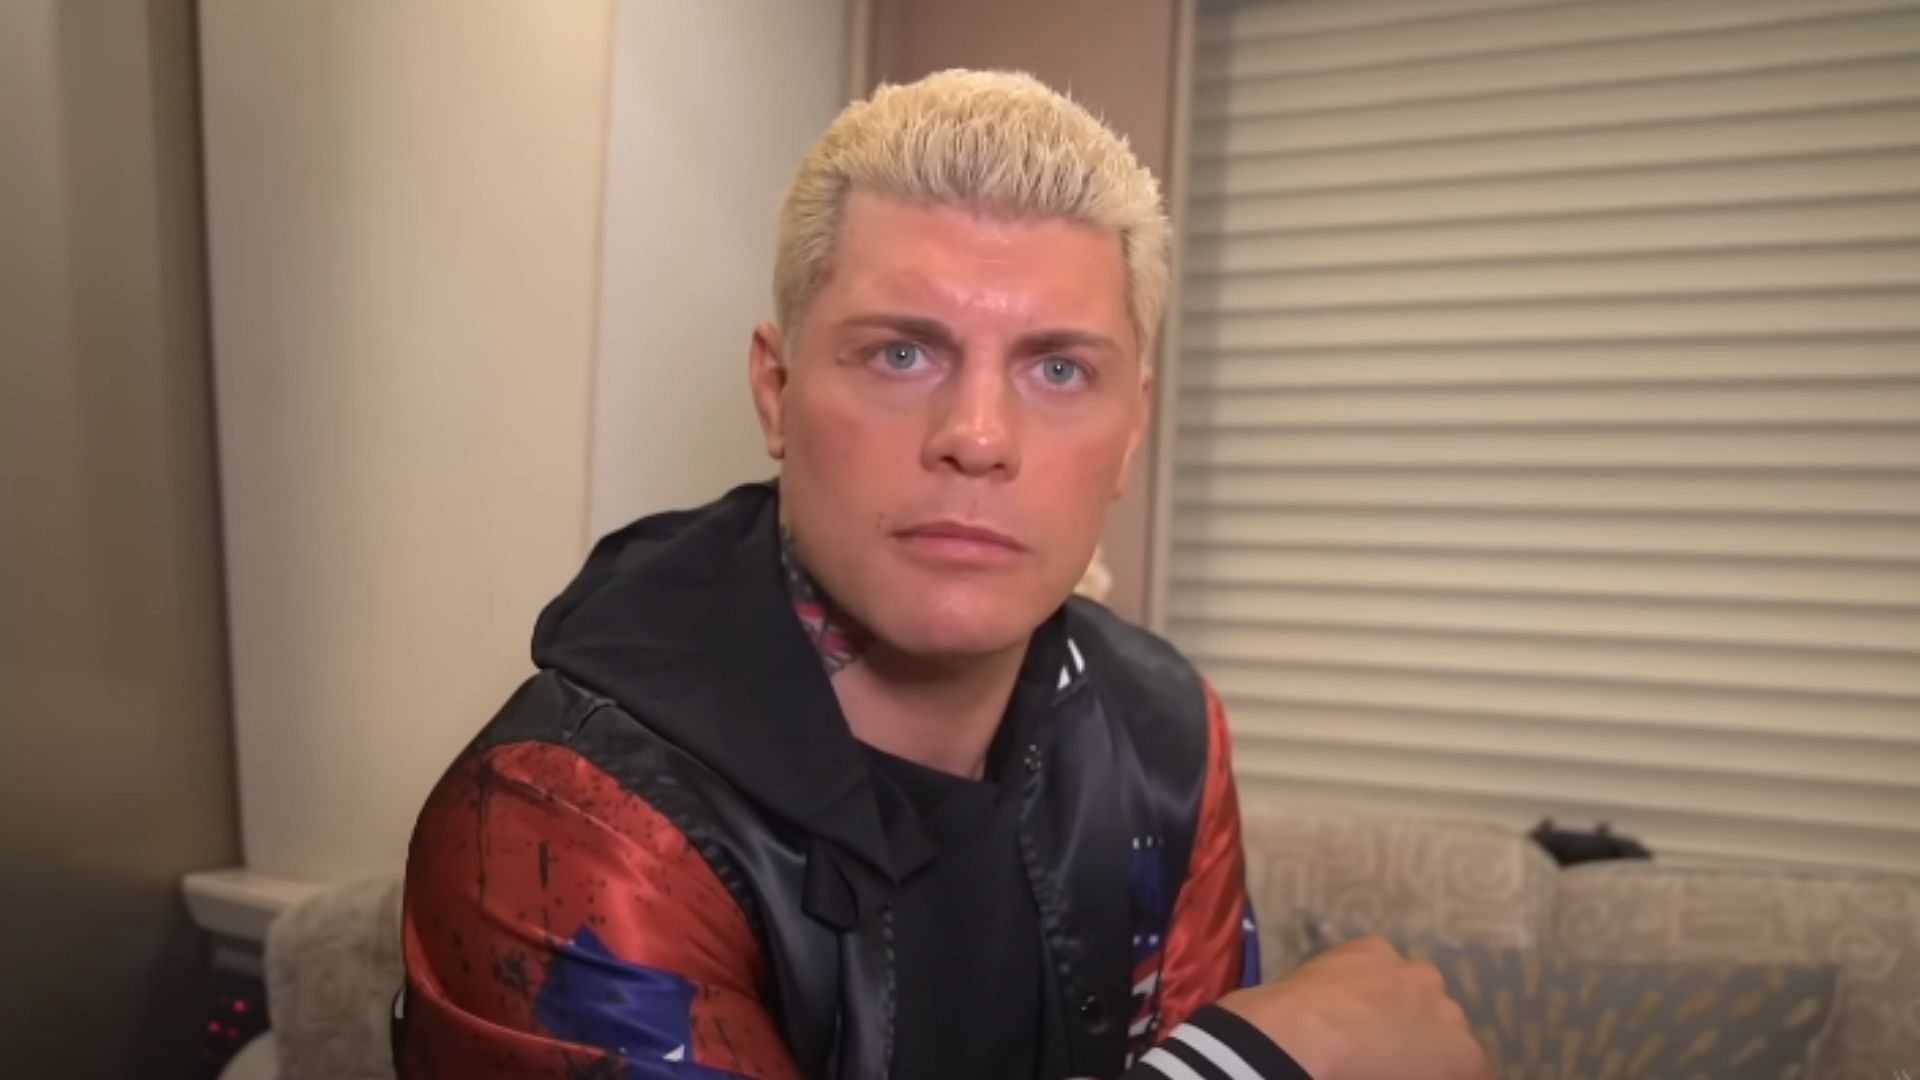 RAW Superstar Cody Rhodes recently returned to WWE